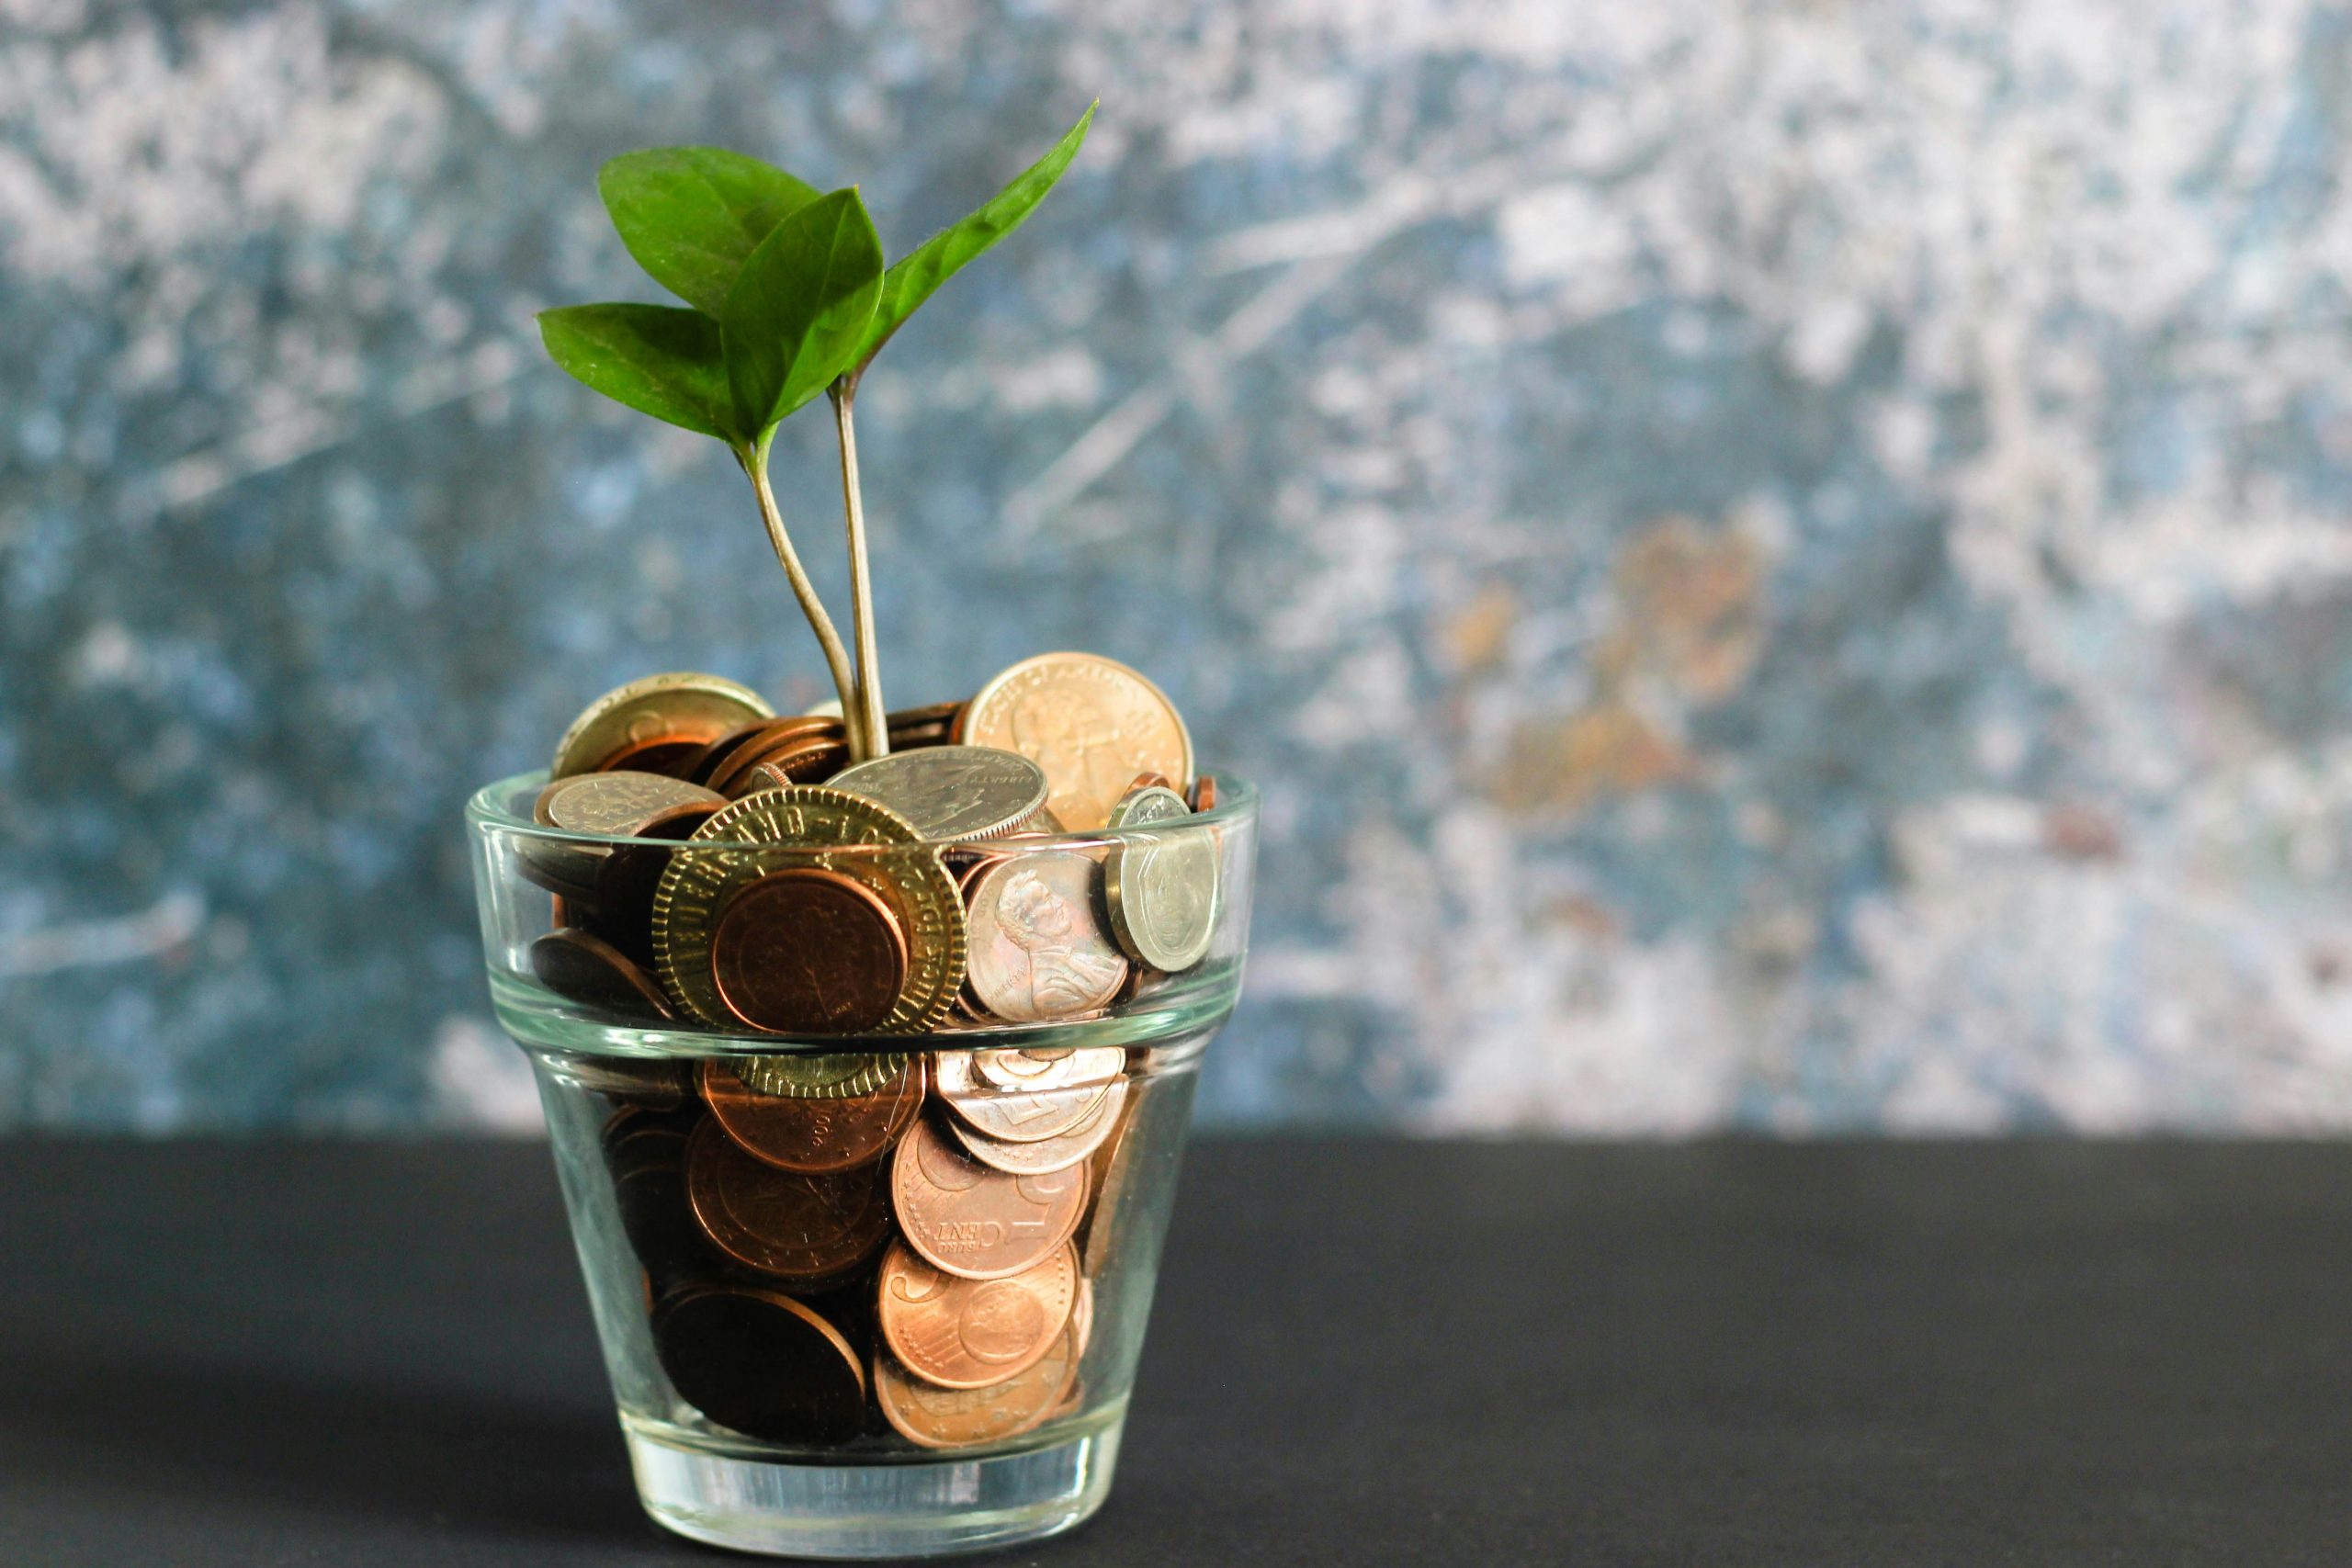 A clear glass filled with coins. Out of the coin sprouts a small green-leafed plant.